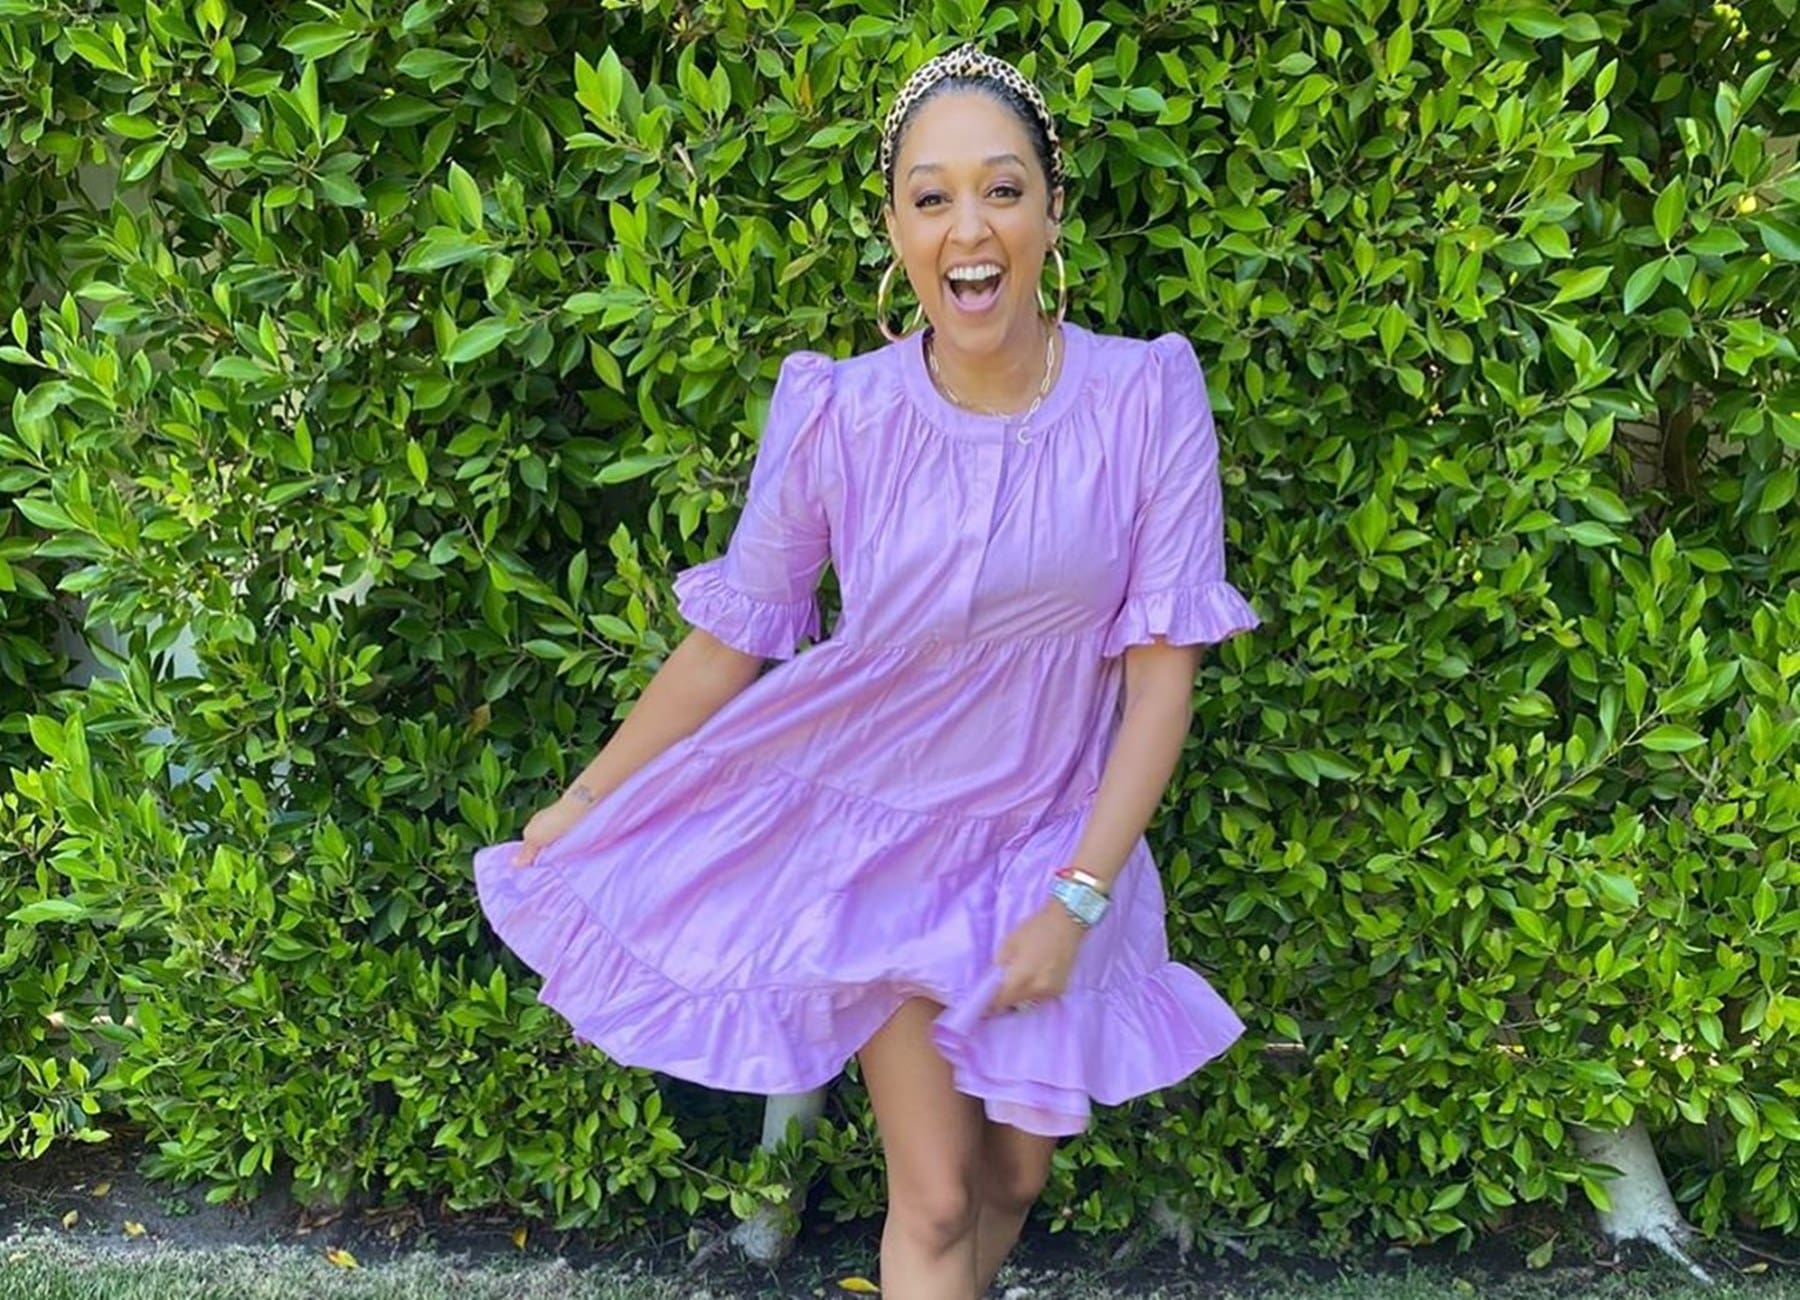 Tia Mowry Is Taking Care Of Her Wellbeing